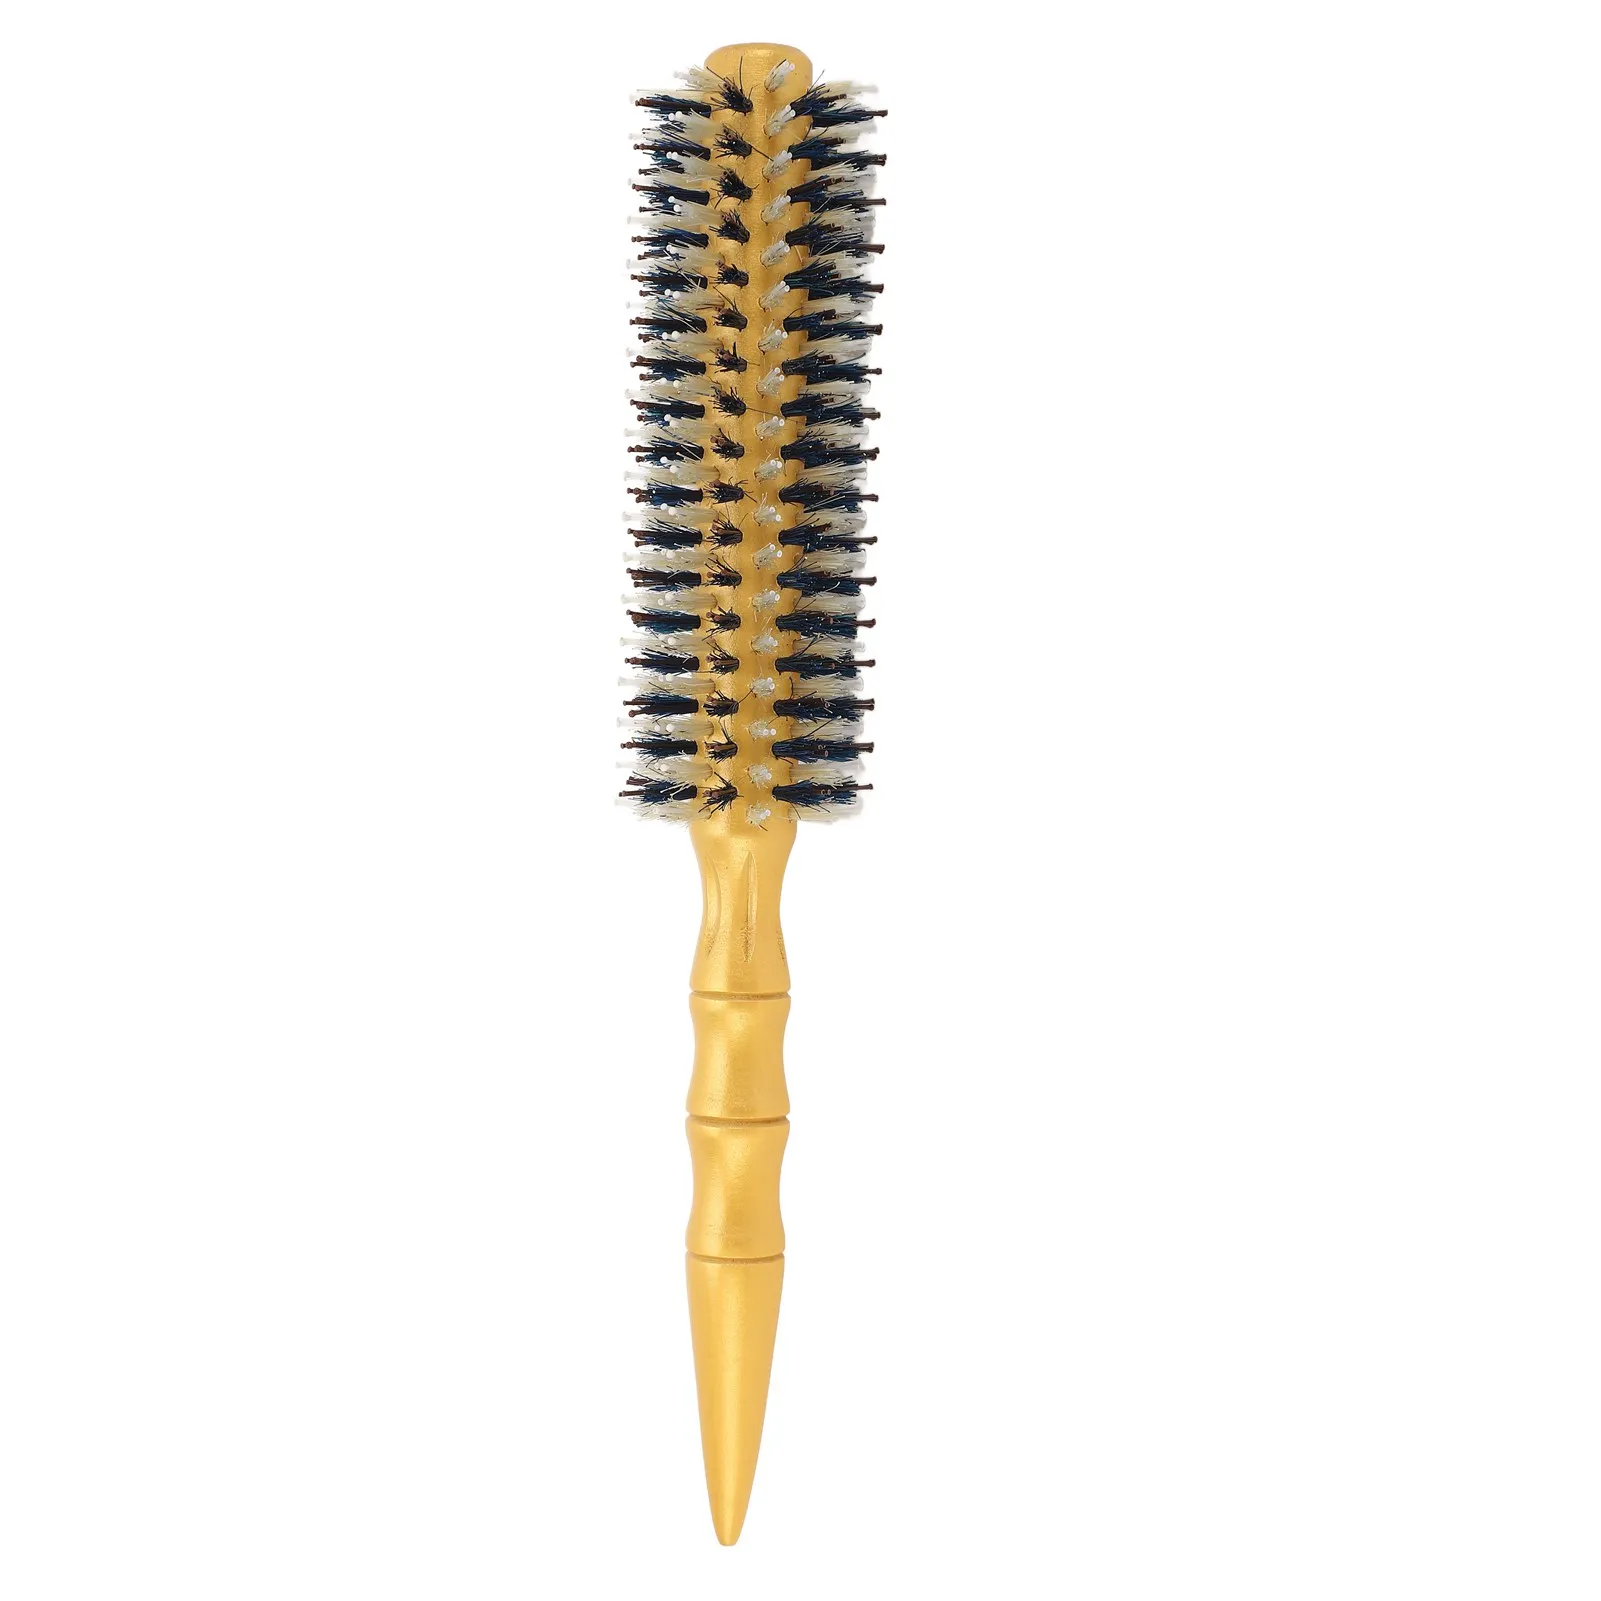 

Round Hair Brush Wooden Handle Curling Round Brush Imitation Bristle Nylon Hair Styling Tool for Straightening for Home Travel